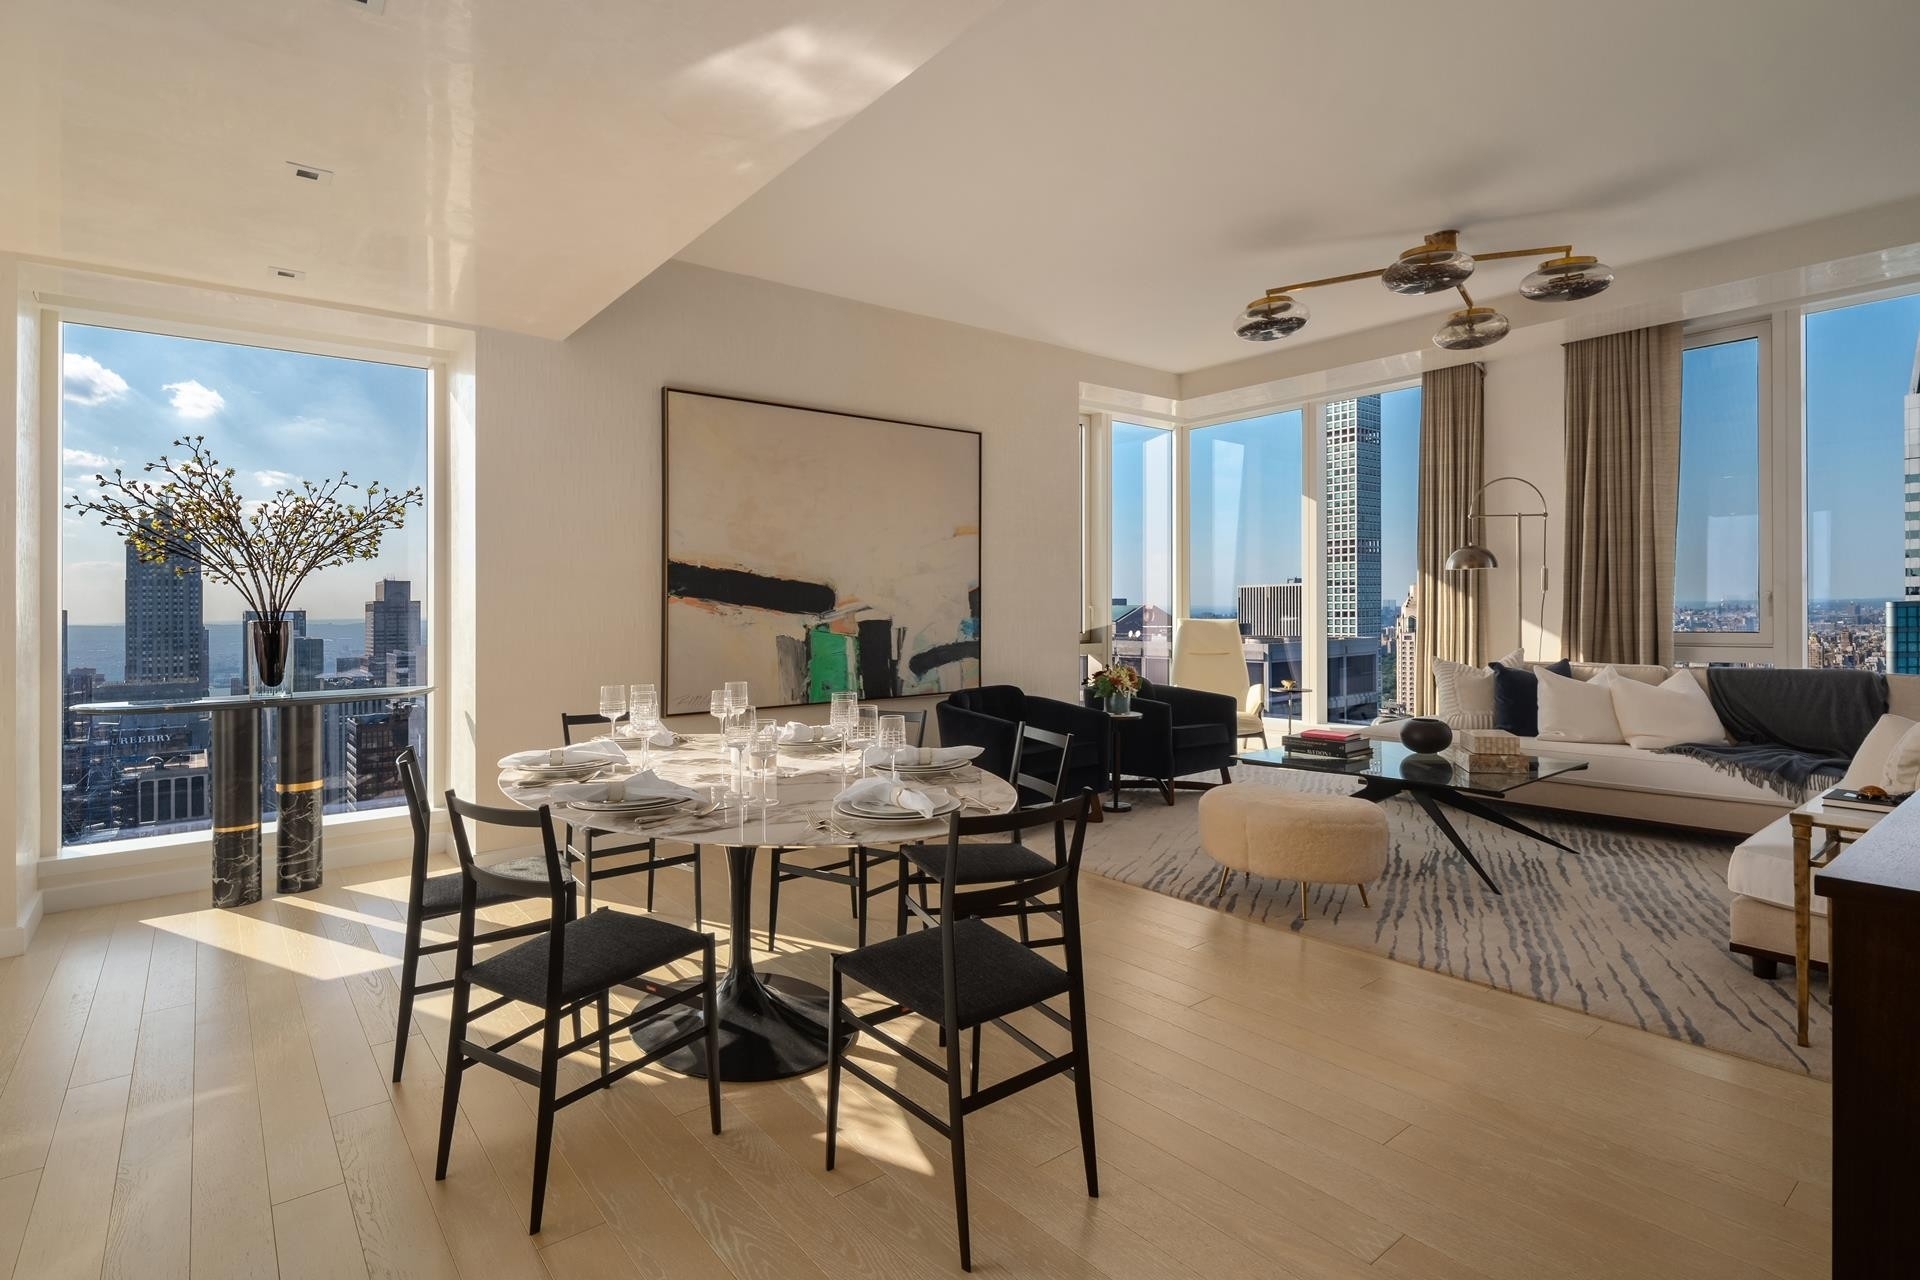 1. Condominiums for Sale at The Centrale, 138 E 50TH ST, 61 Turtle Bay, New York, New York 10022